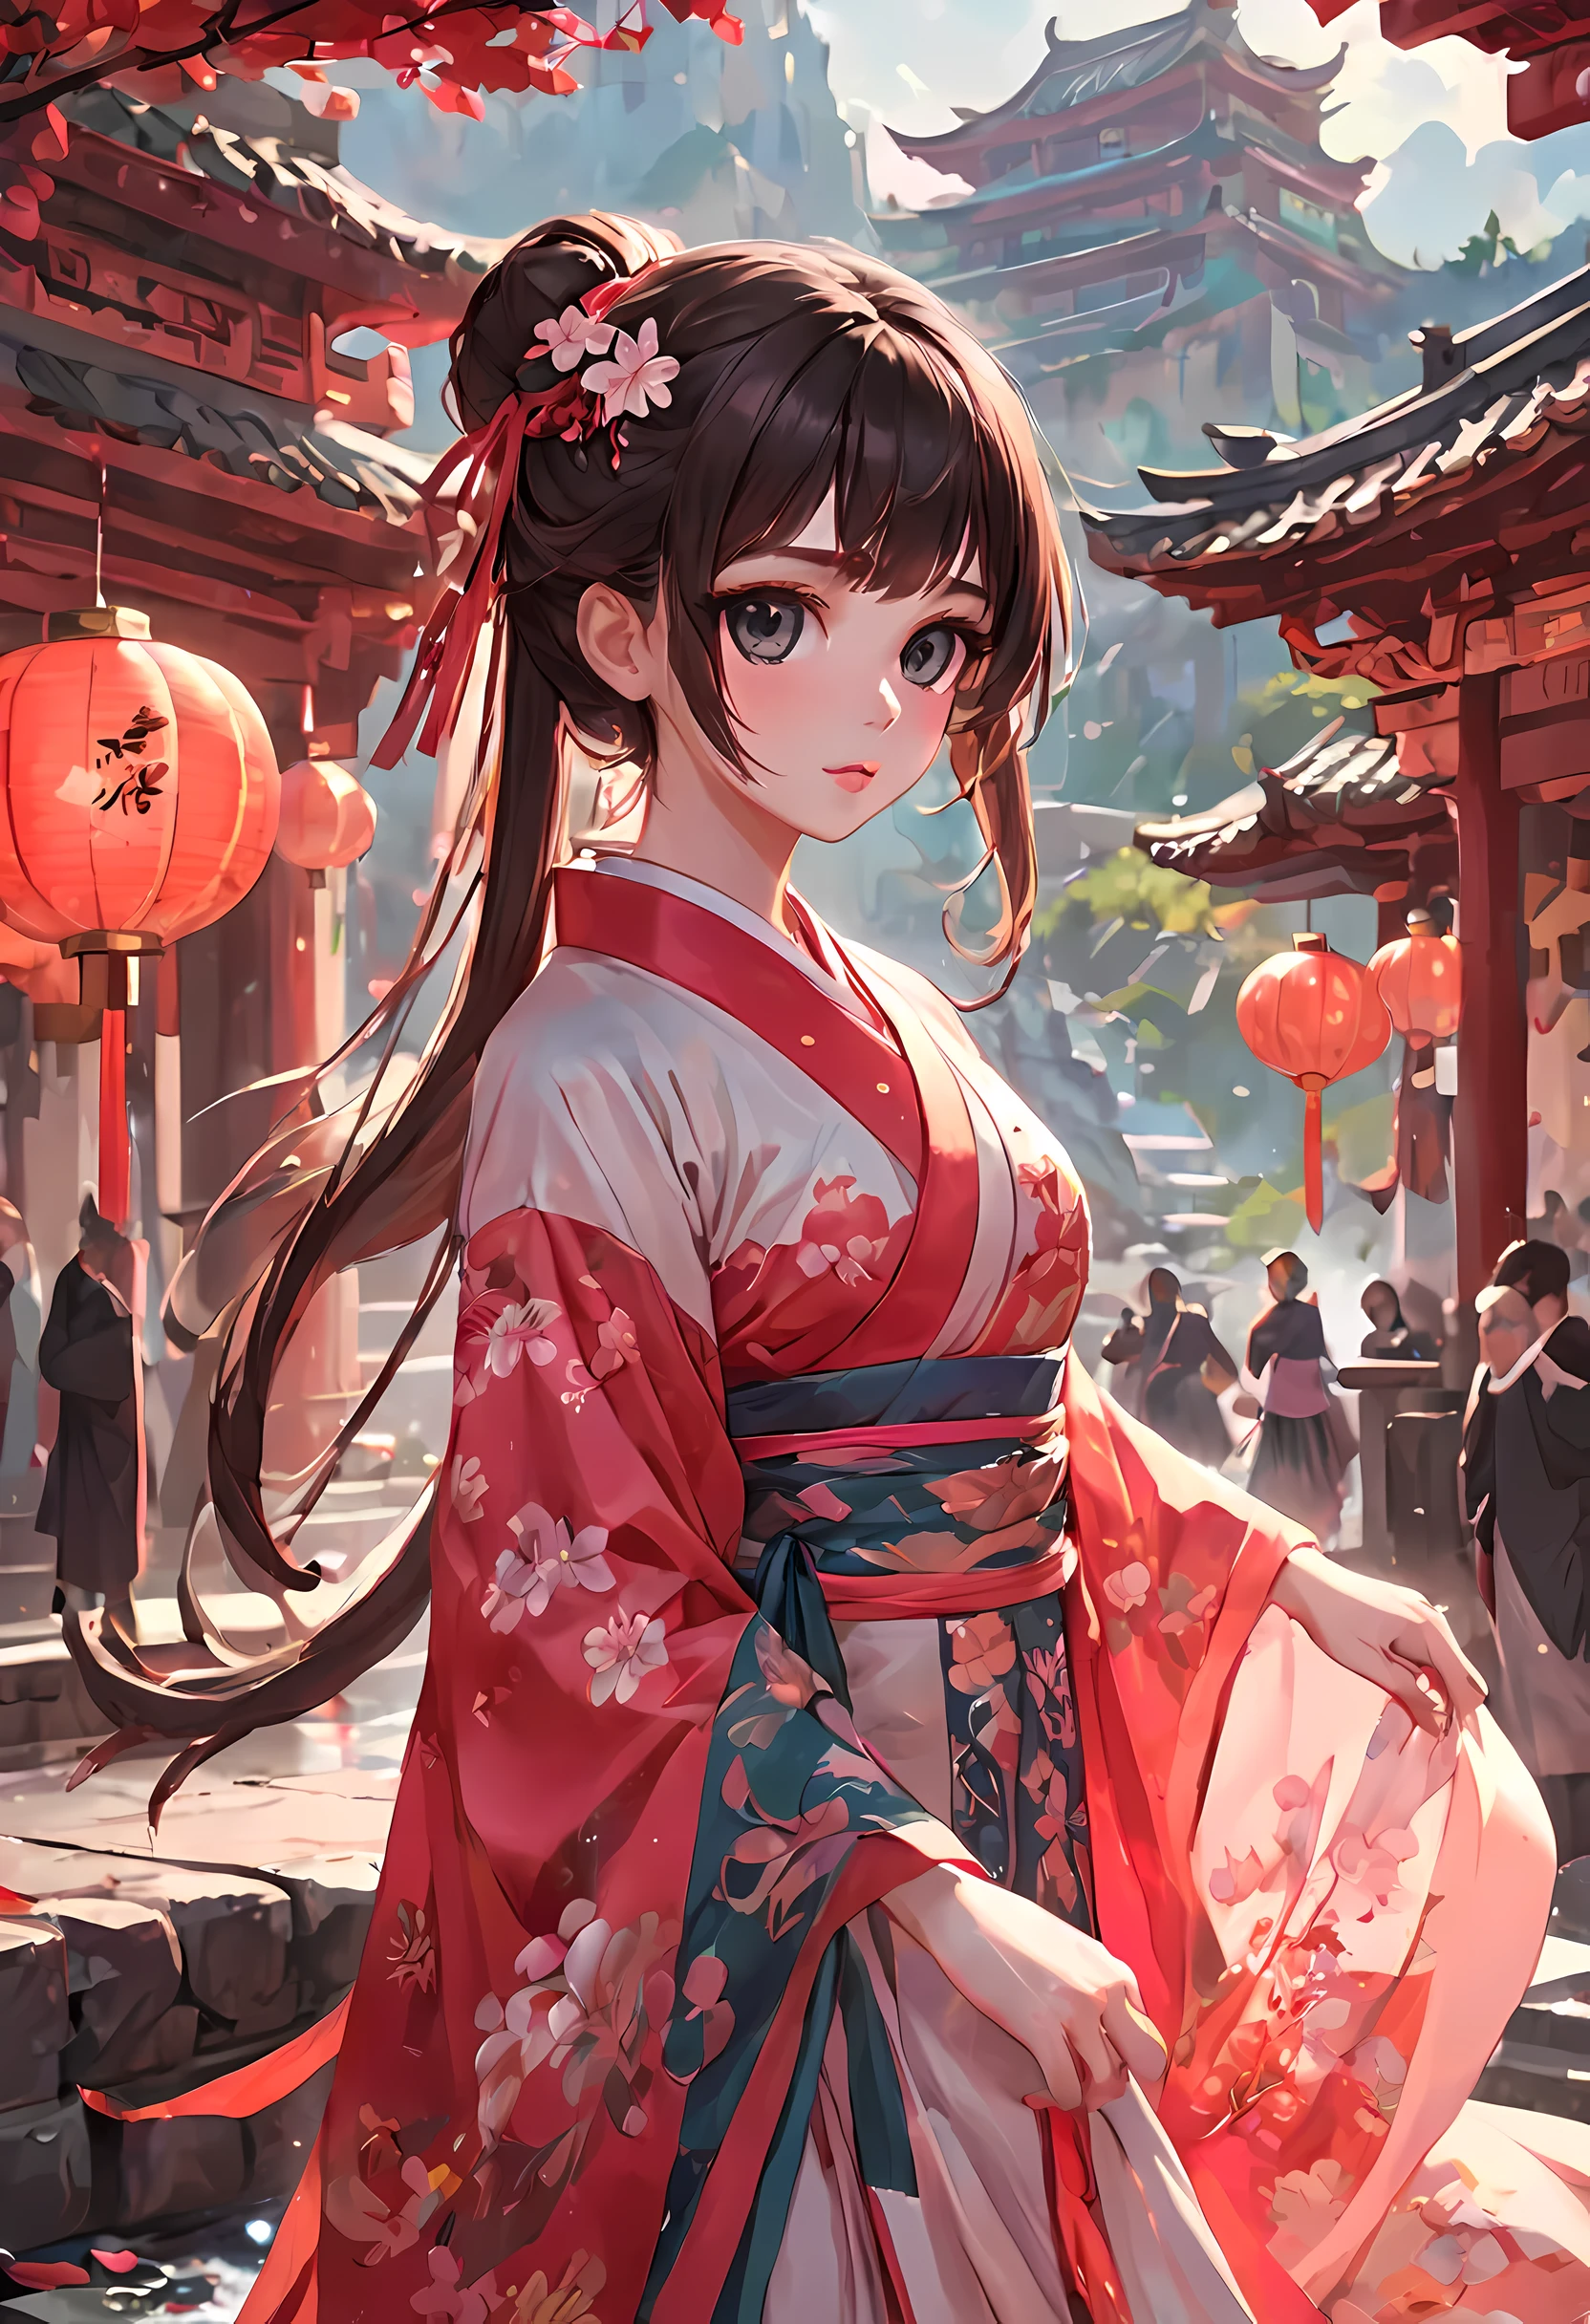 (best quality,masterpiece:1.2),(perfect face:1.5),(Bright Eyes:1.3),Animation scene of a beautiful girl wearing Hanfu walking on a busy street,(Palace and majestic tower atop the waterfall),Taoist,(Detailed Hanfu:1.3),guweiz style artwork, Anime Fantasy Illustration, 2.5d cgi anime fantasy artwork, anime fantasy artwork, anime art wallpaper 4k, anime art wallpaper 4k, anime style 4k, Chinese fantasy, fantasy art style, A beautiful artistic illustration, Anime Fantasy Illustration, beautiful fantasy art